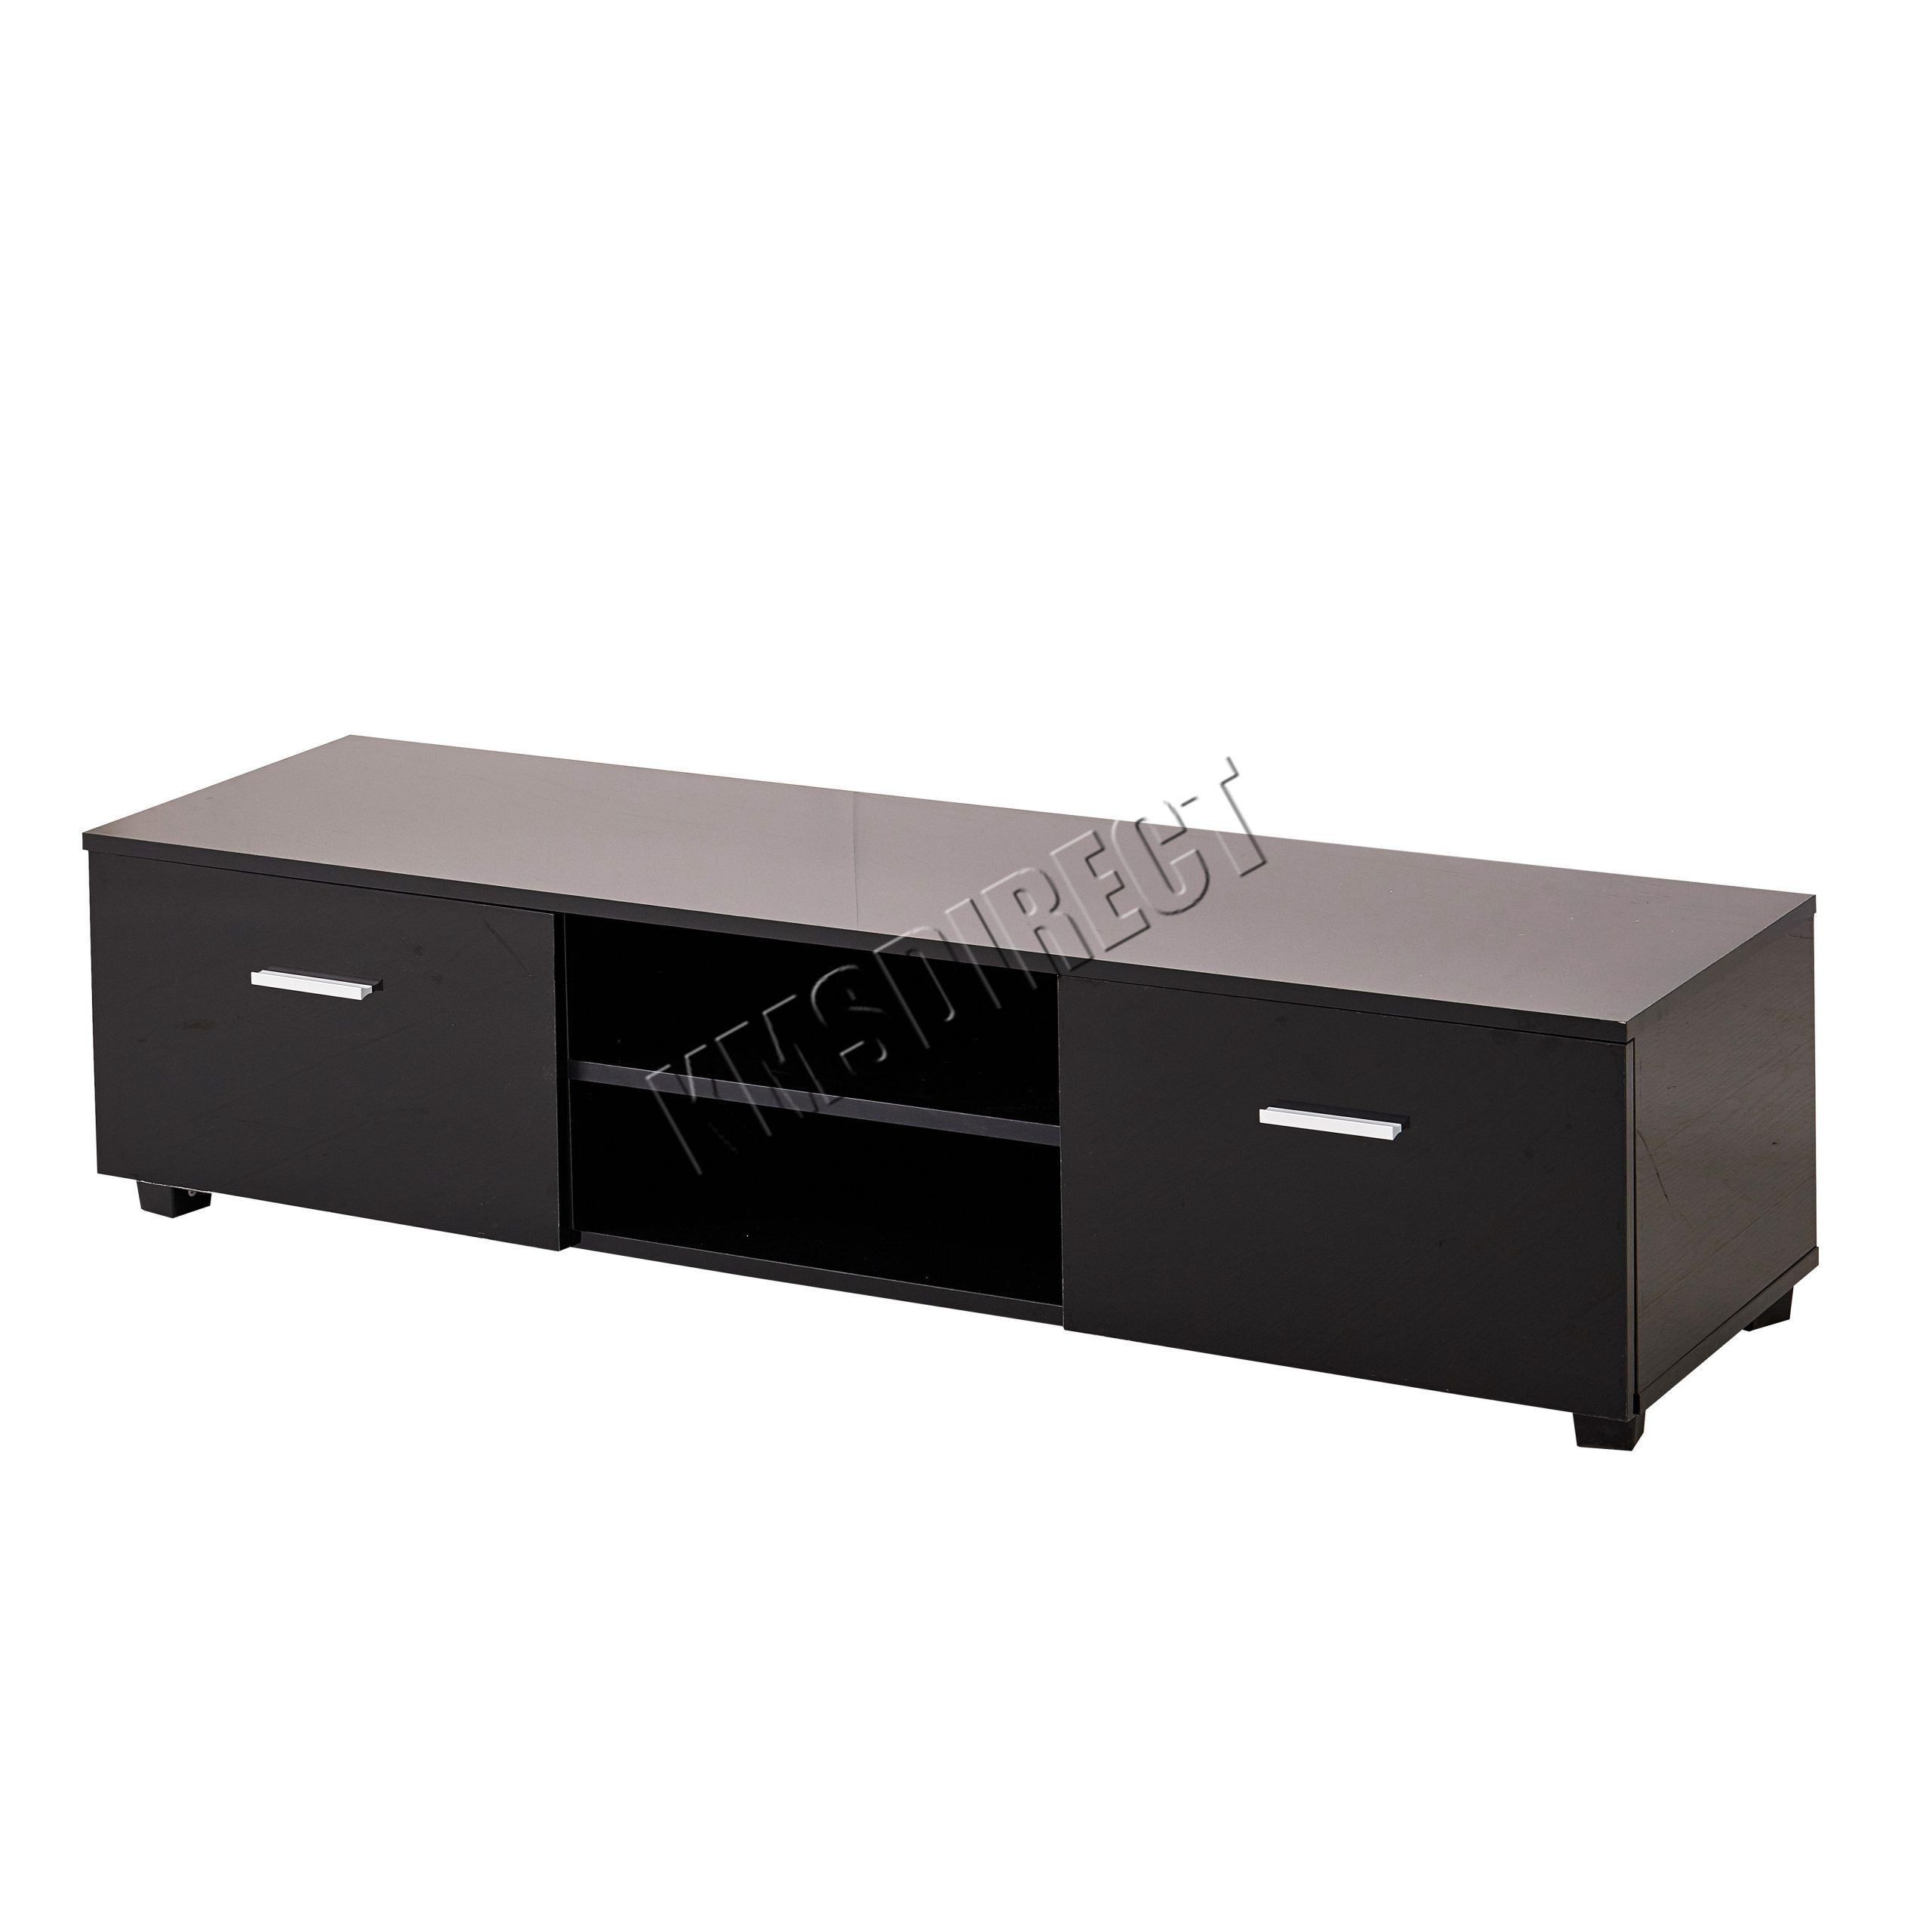 Foxhunter High Gloss Mdf Tv Cabinet Unit Stand Black Home Pertaining To Long Black Gloss Tv Unit (View 15 of 15)